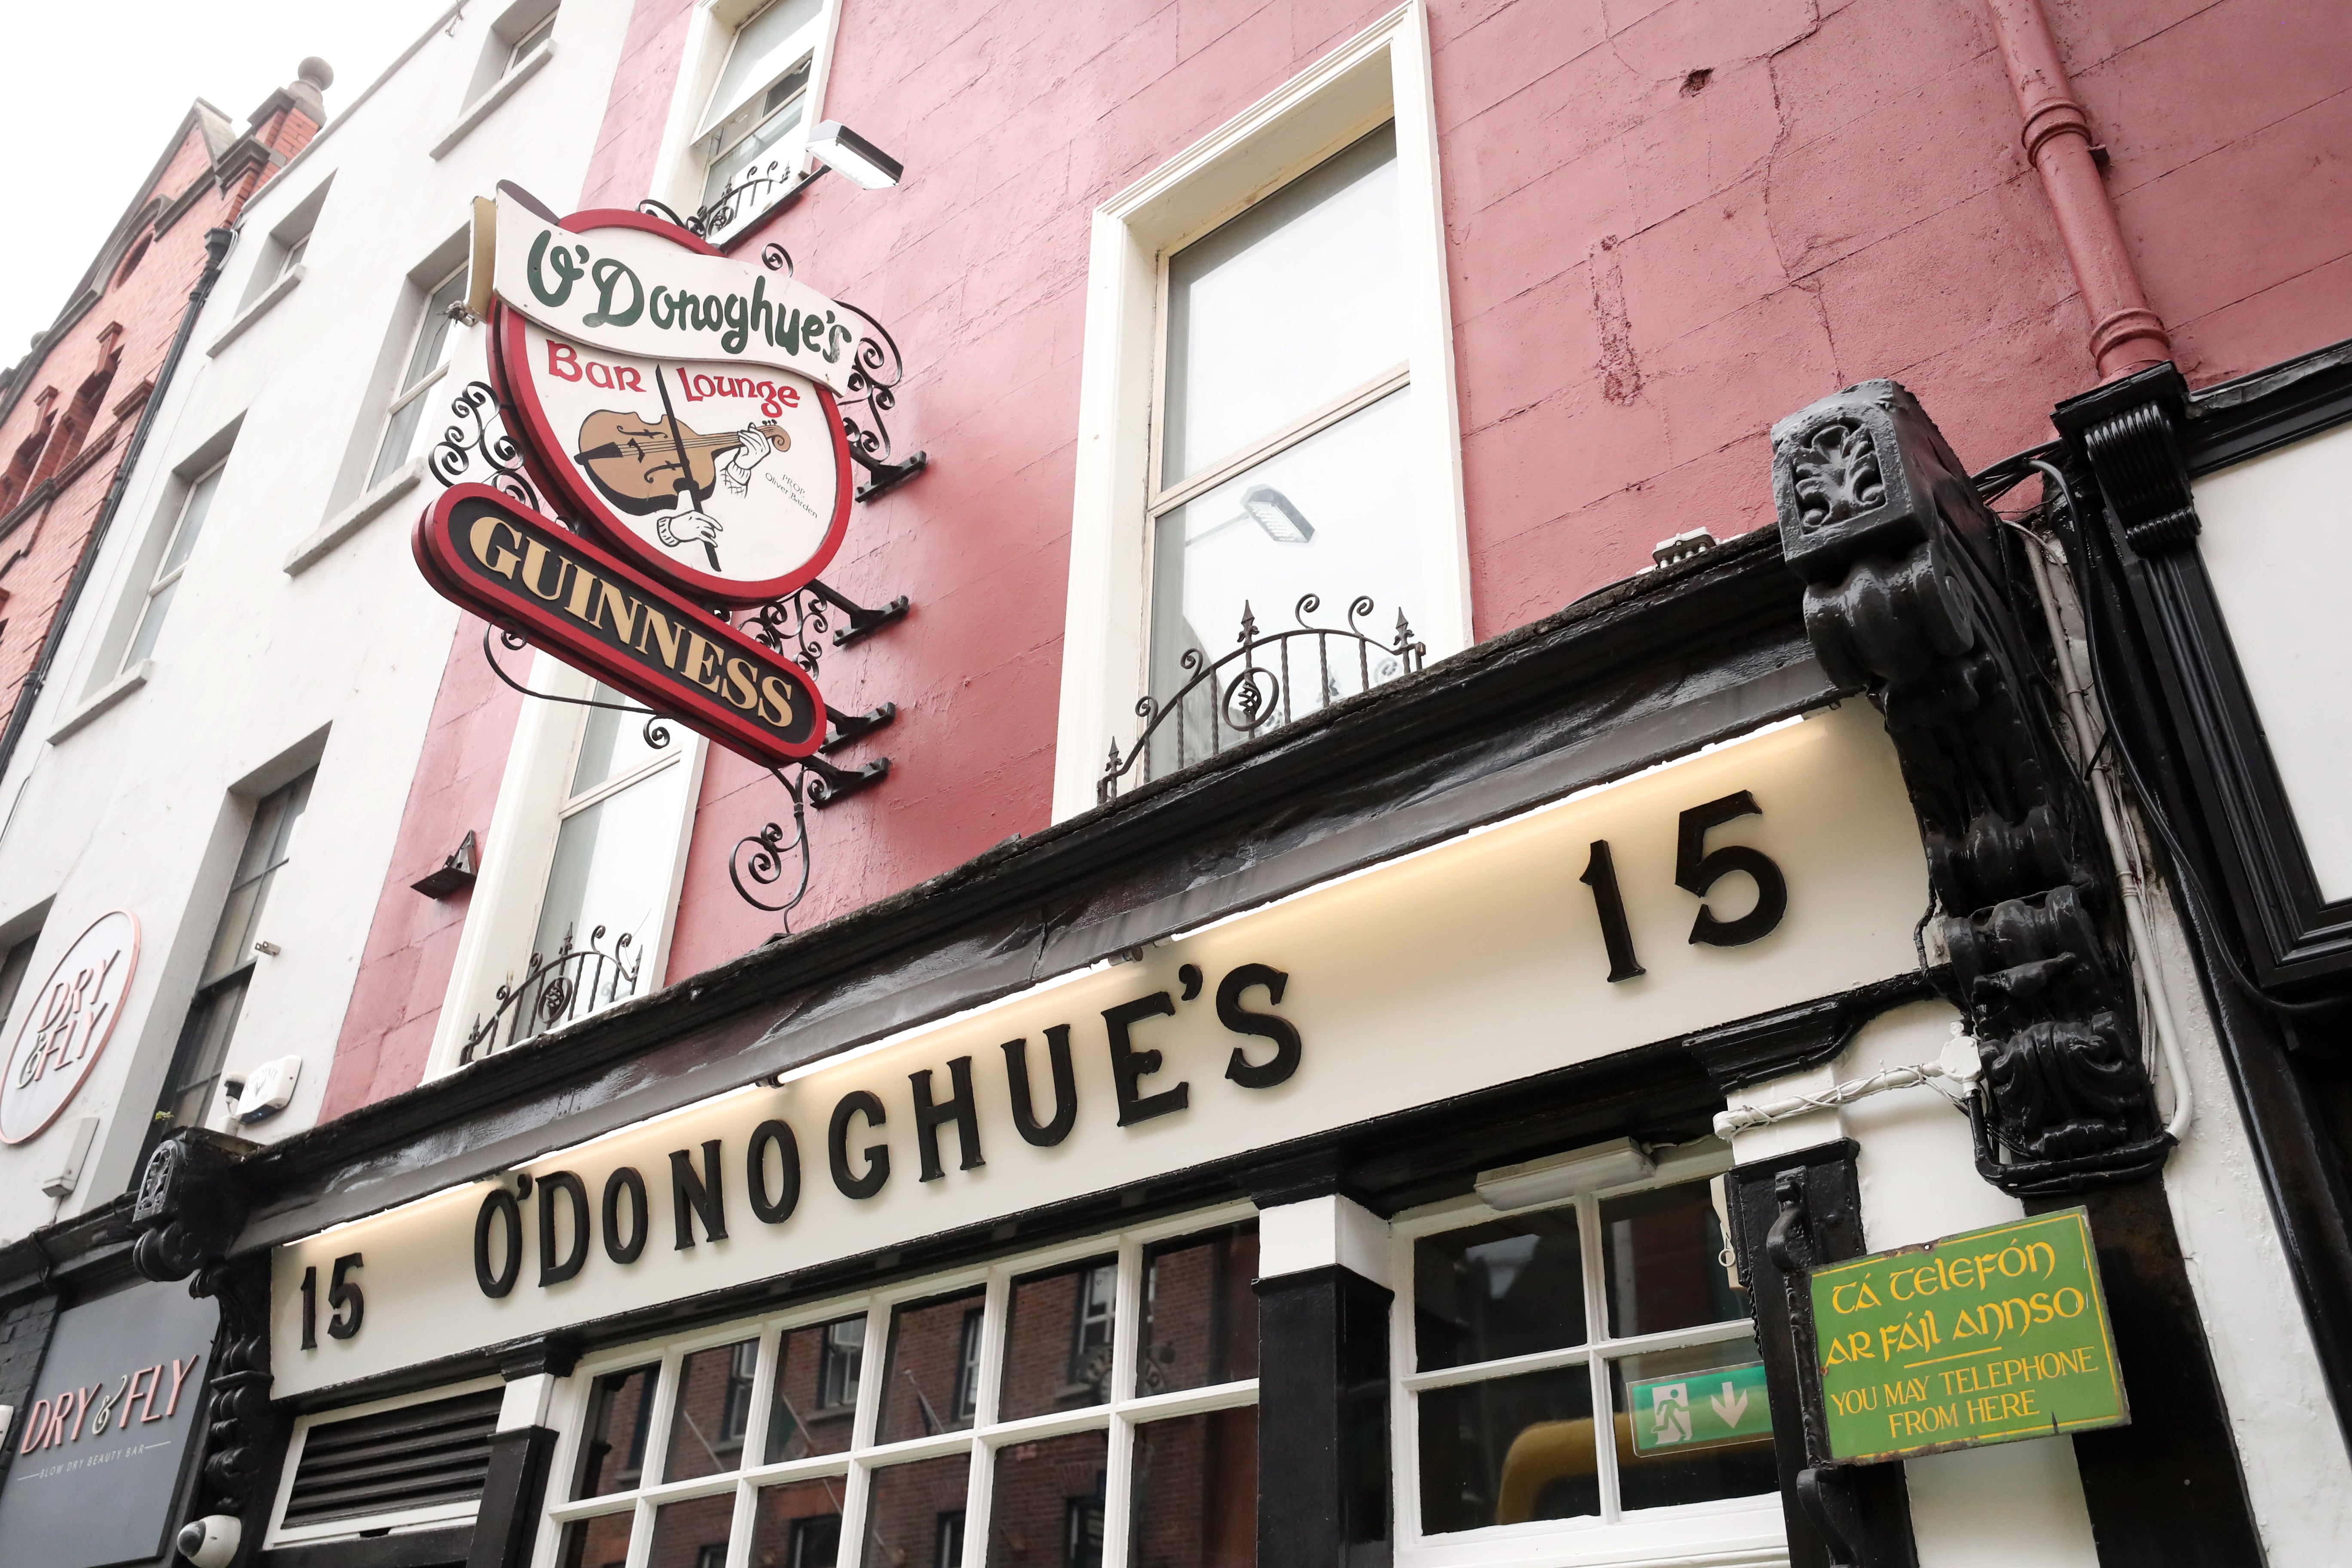 O’Donoghues Bar is pictured in Dublin, Ireland, on 4 June, 2021.